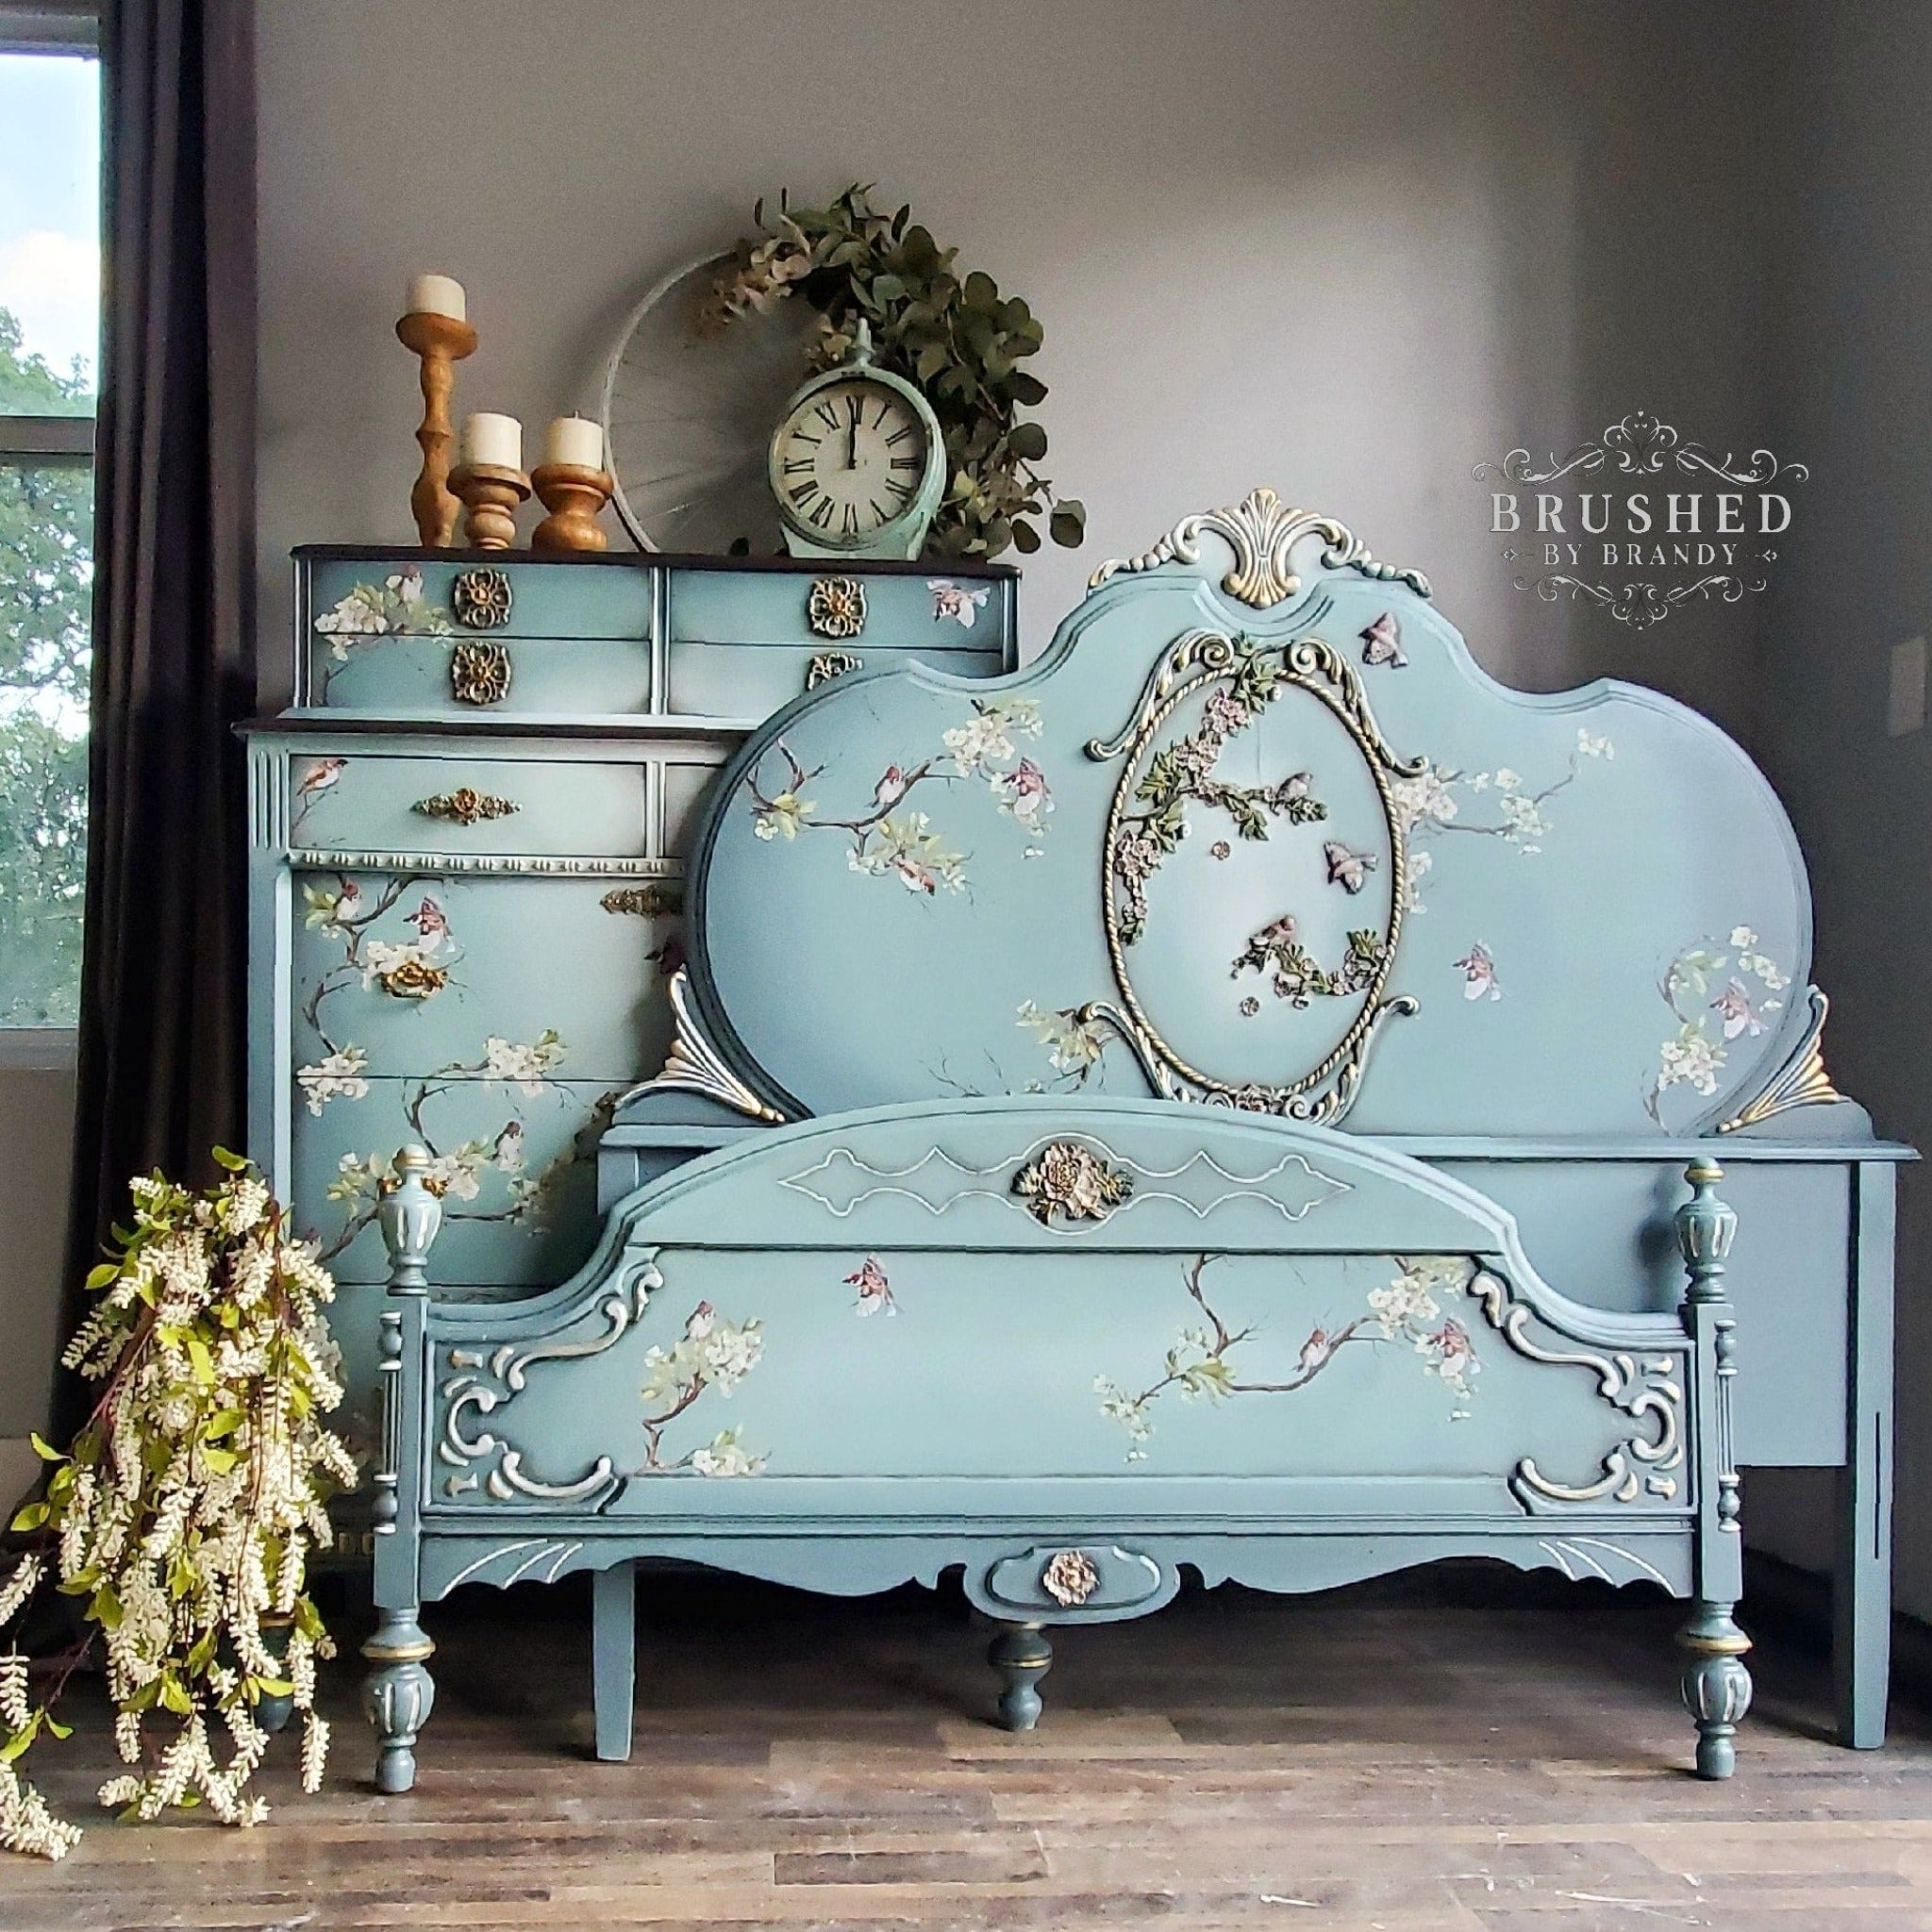 A vintage bedroom furniture set containing a headboard, footboard, and chest dresser refurbished by Brushed by Brandy are painted light blue and feature ReDesign with Prima's Blossom Flight transfer on them.